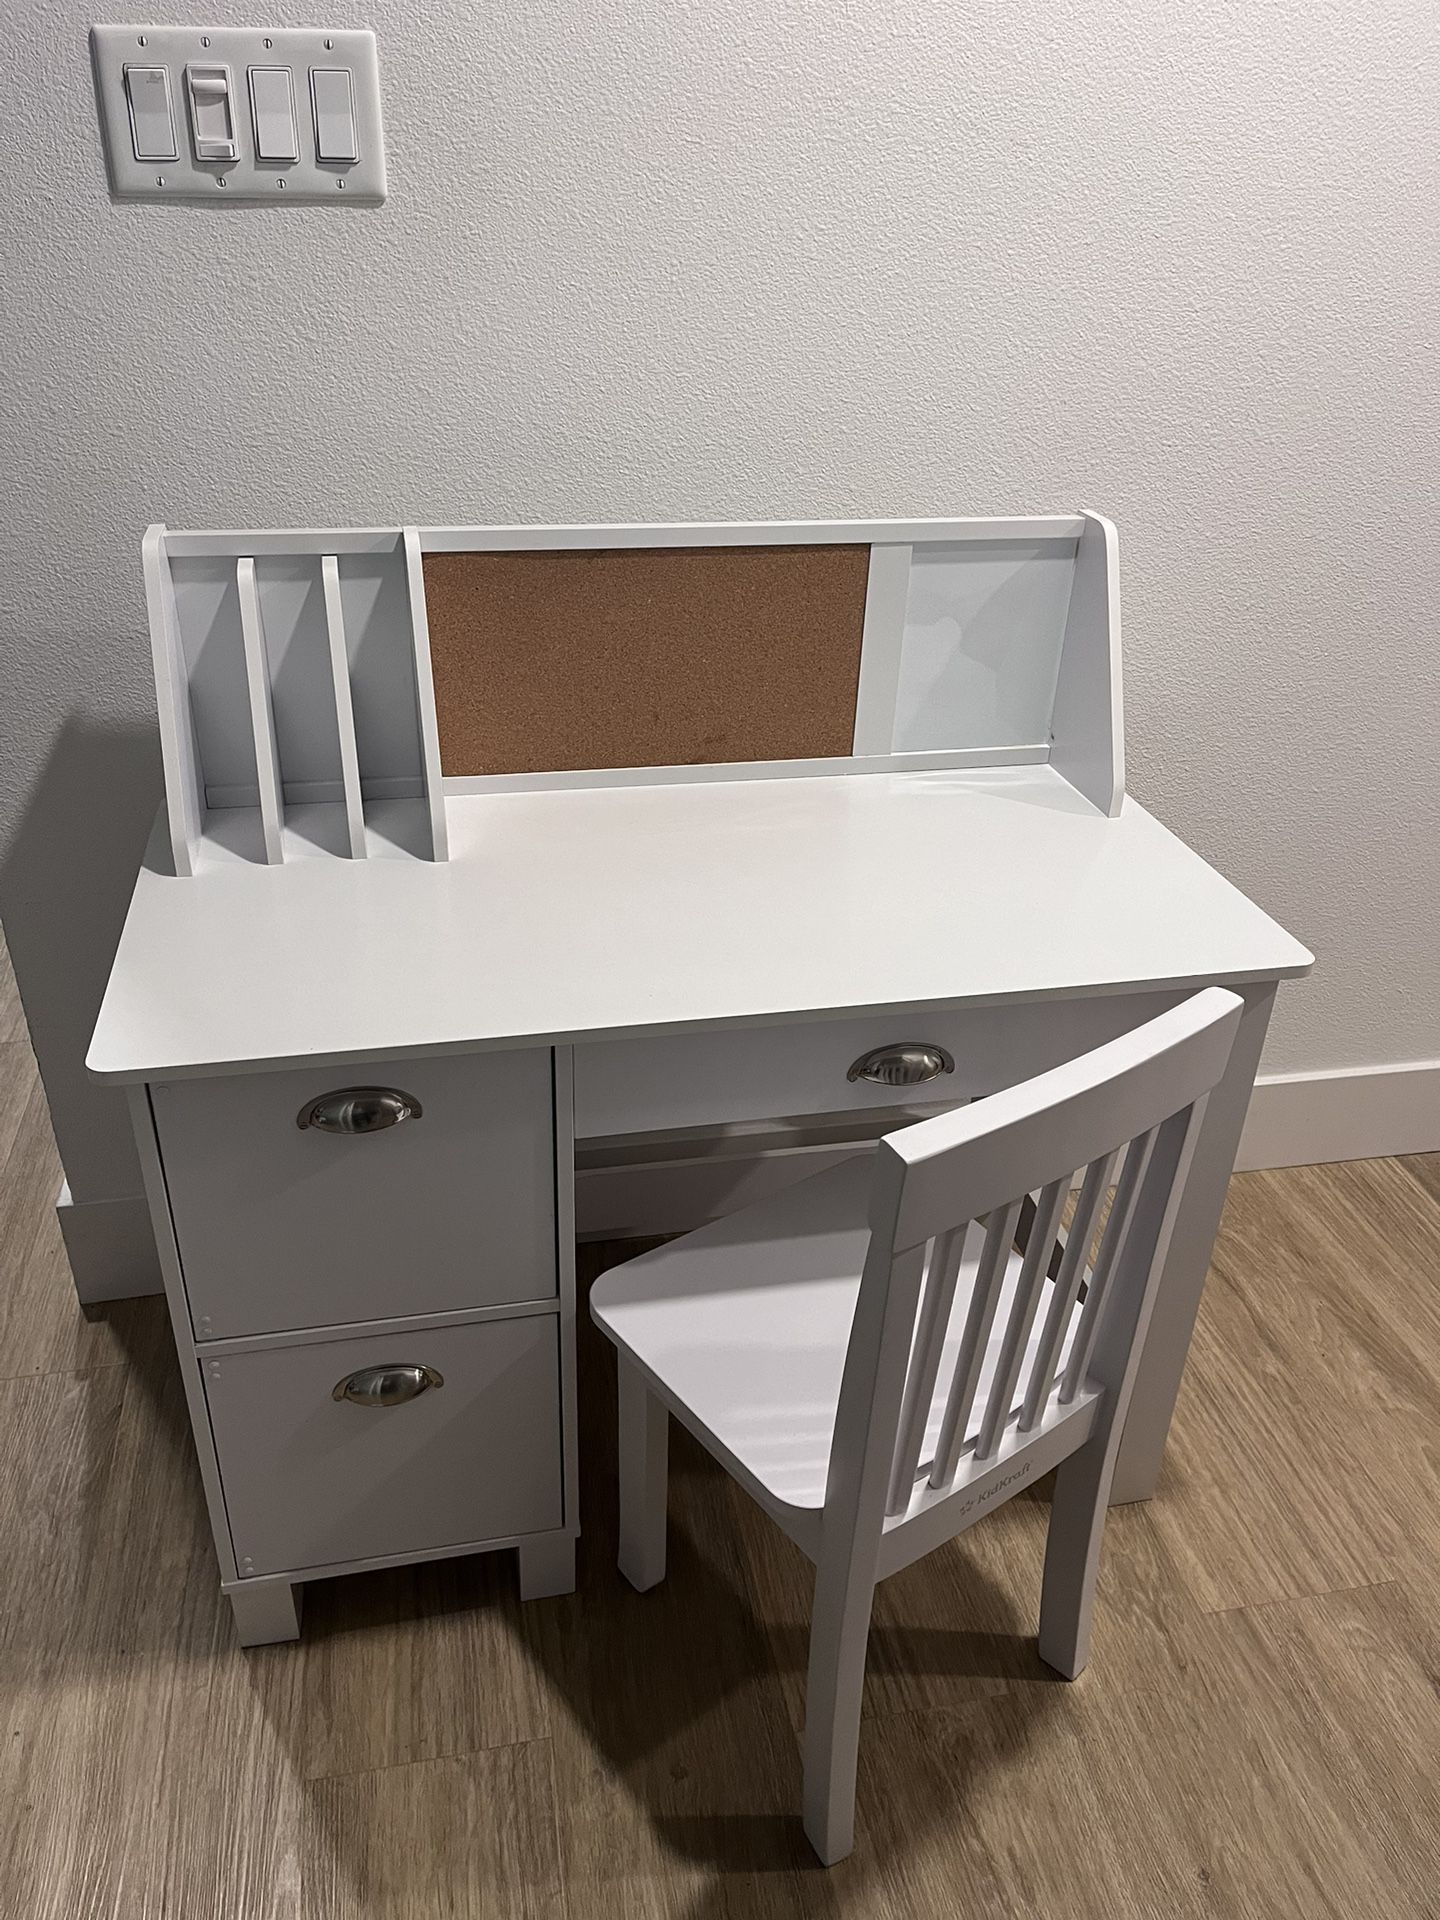 Study Desk For Child With Chair